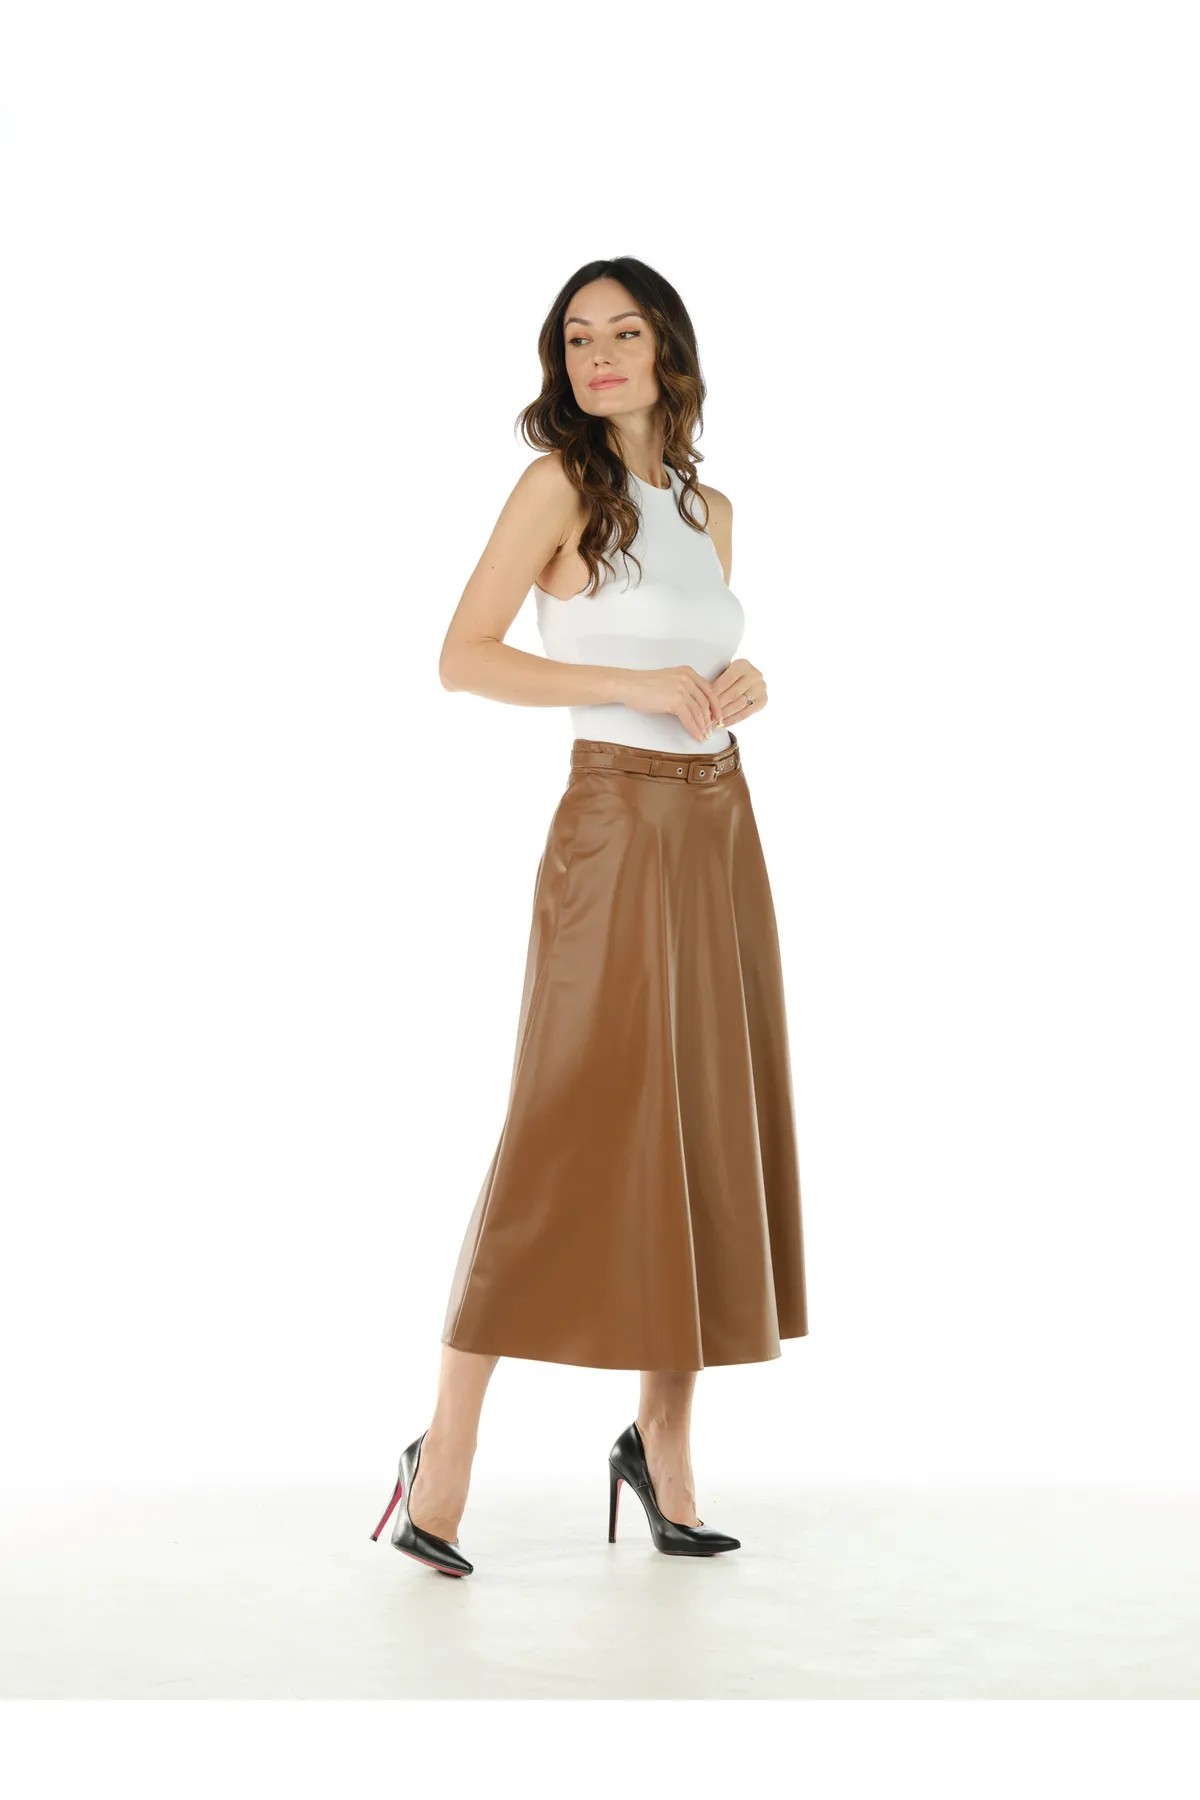 BROWN Faux Leather LONG SKIRT